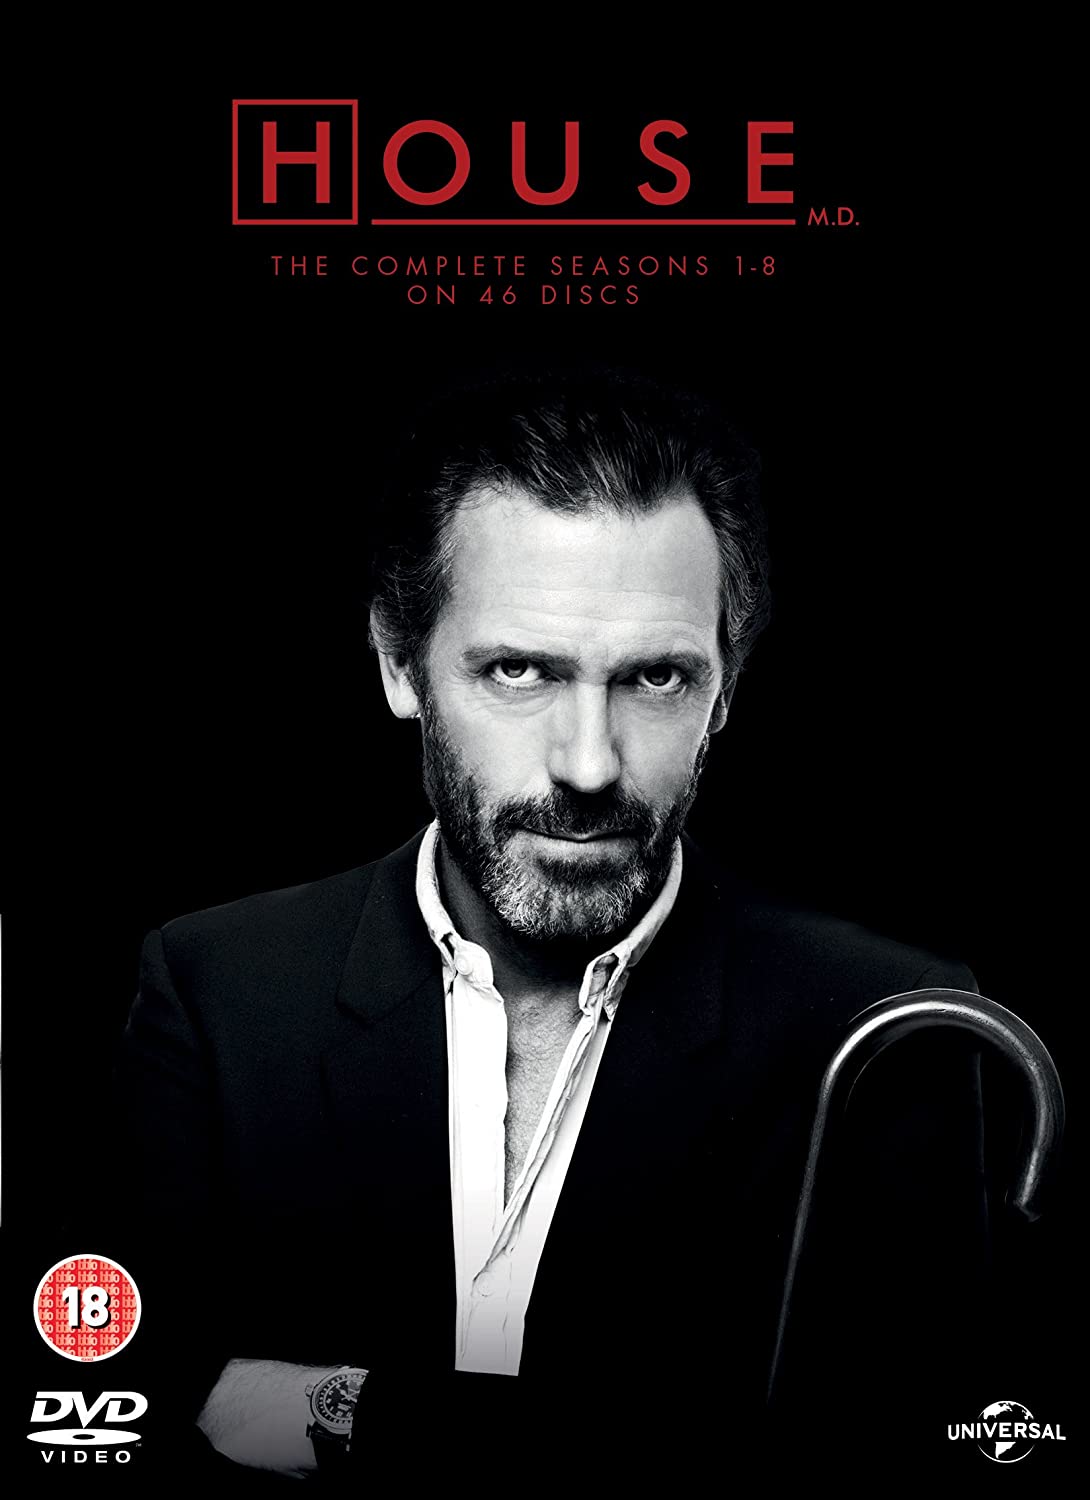 House: The Complete Series 1-8 (DVD)